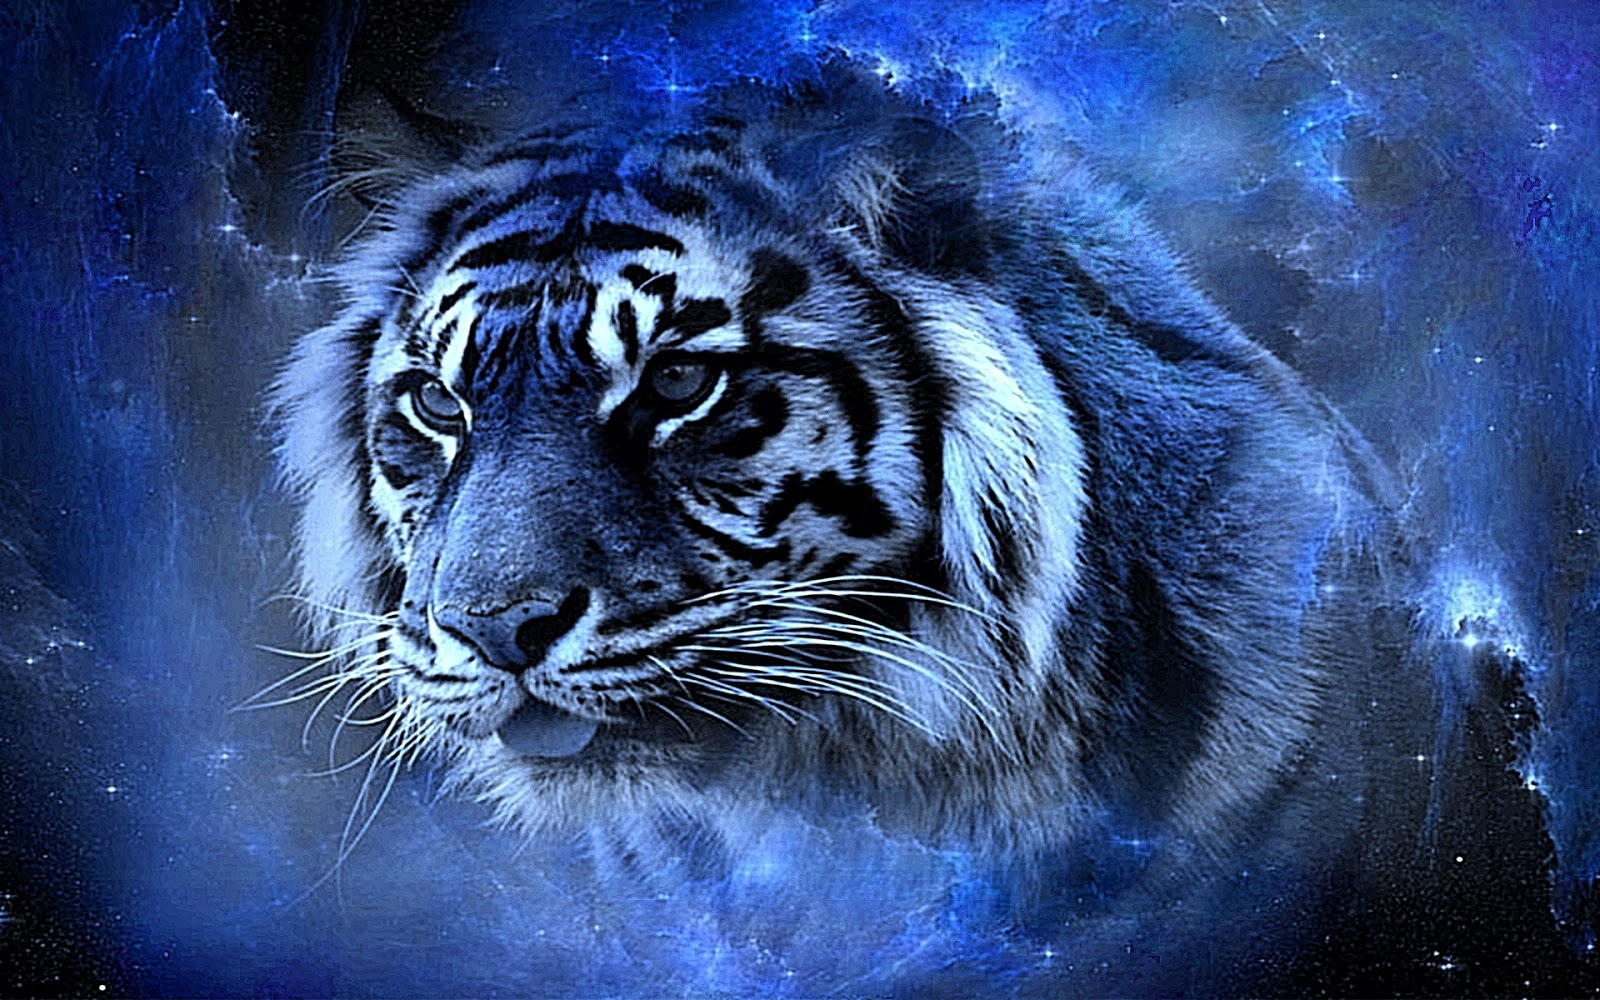 Real Tigers Wallpaper 3D Full HD 4K free  Top Model Hairstyle